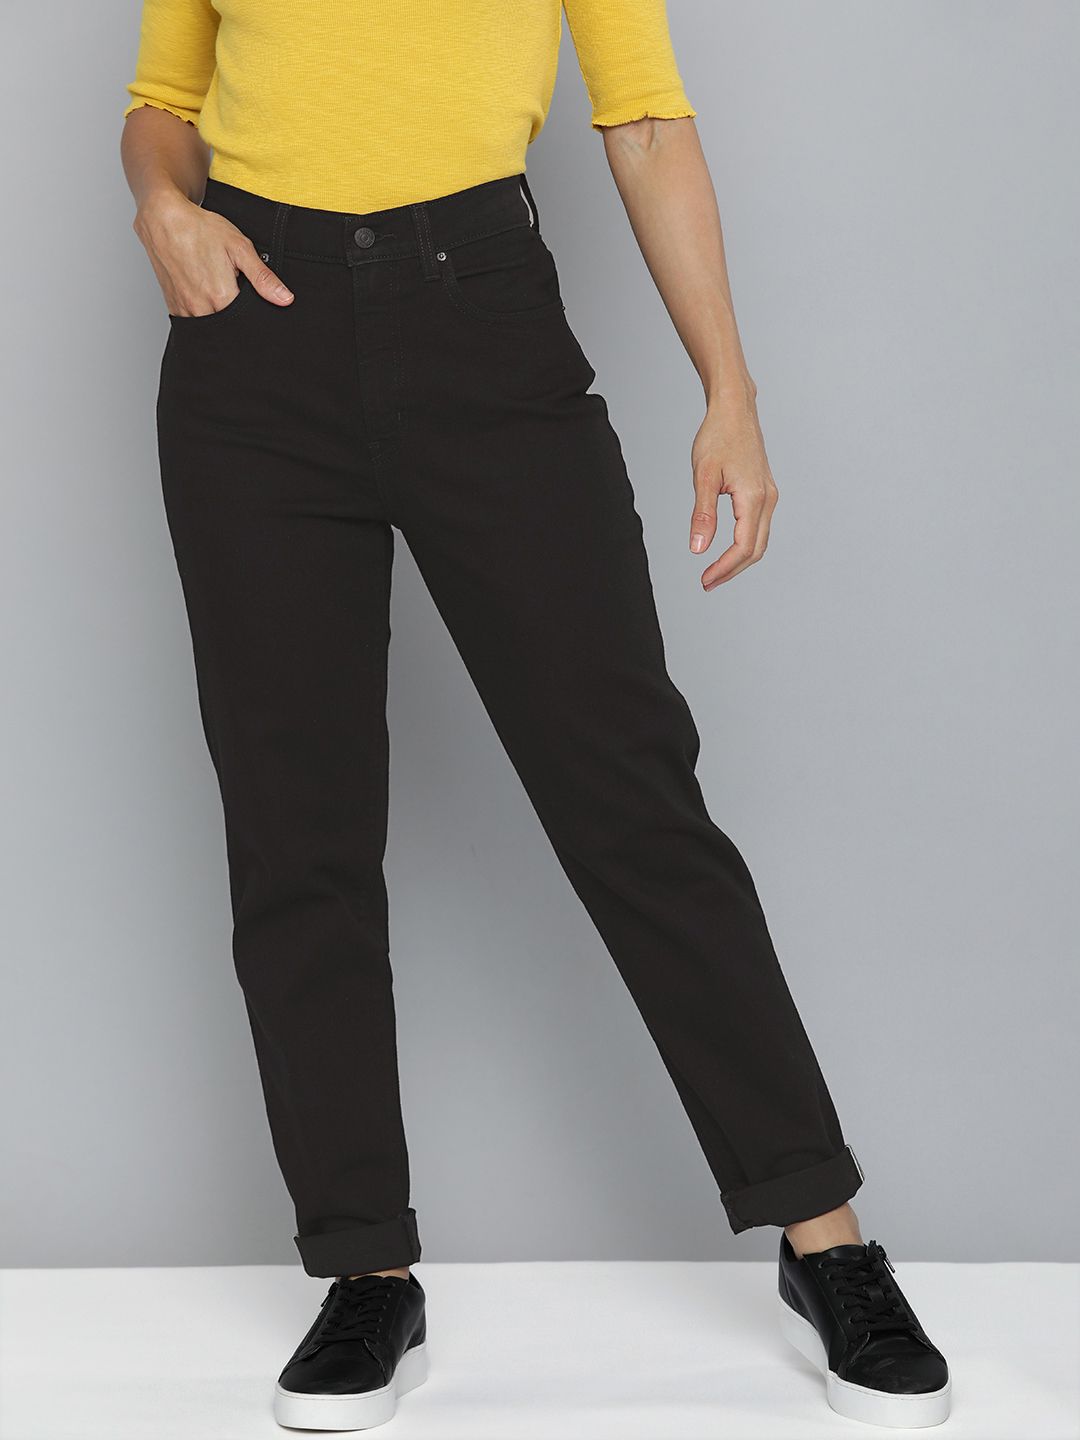 Levis Women Black Tapered Fit High-Rise Stretchable Jeans Price in India